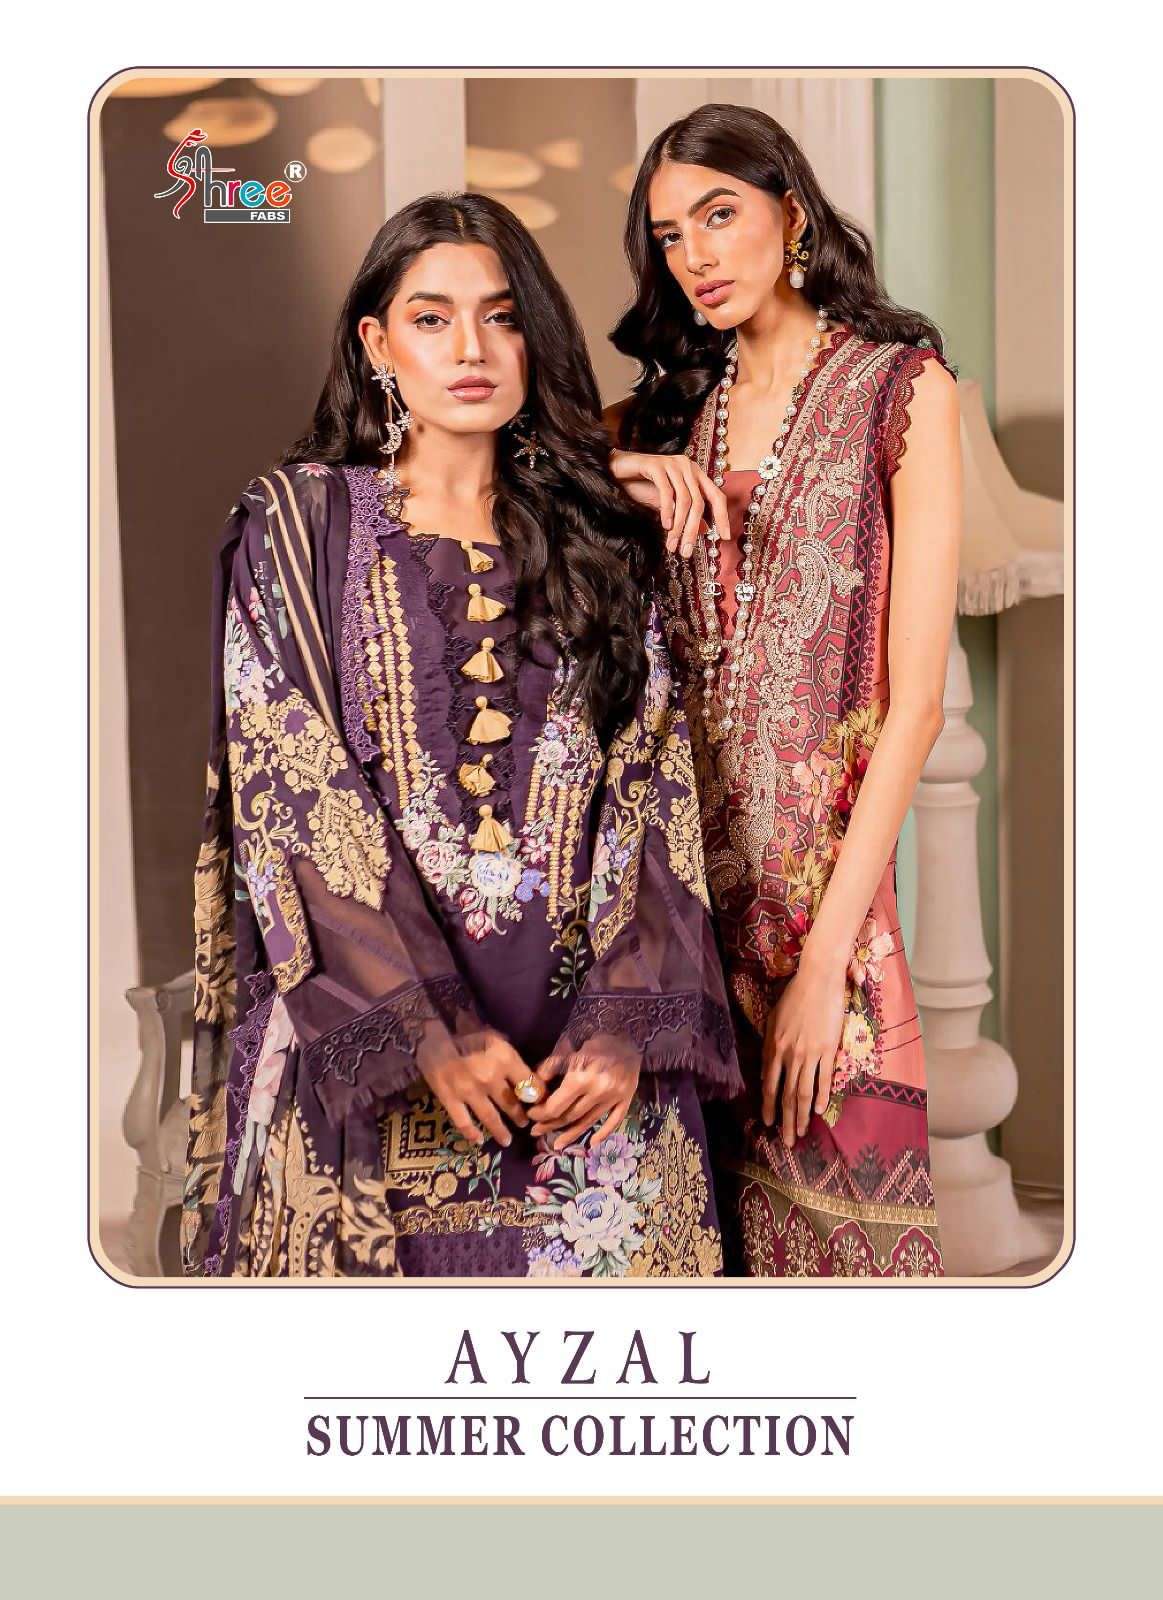 shree fabs ayzal summer collection printed patch embroidery pakistani salwar kameez material 